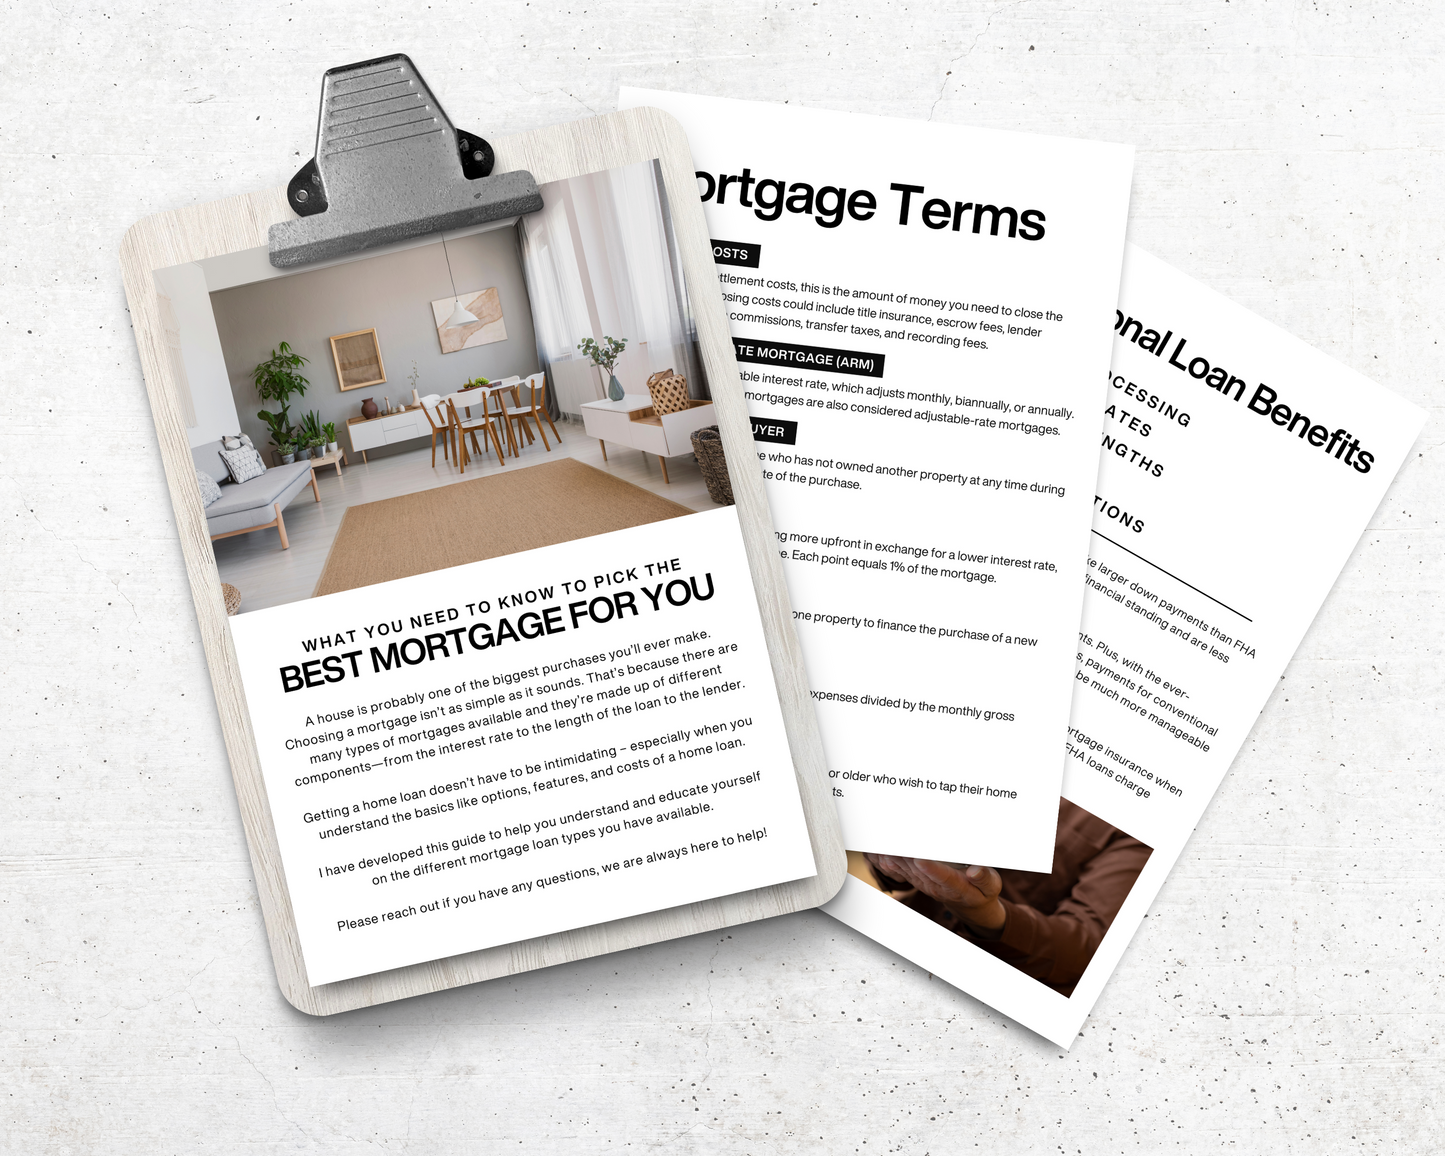 Home Mortgage Guide, Real Estate Template, Home Buyer Guide, Mortgage Marketing, Loan Officer Marketing, Real Estate Flyer, Buyer Packet